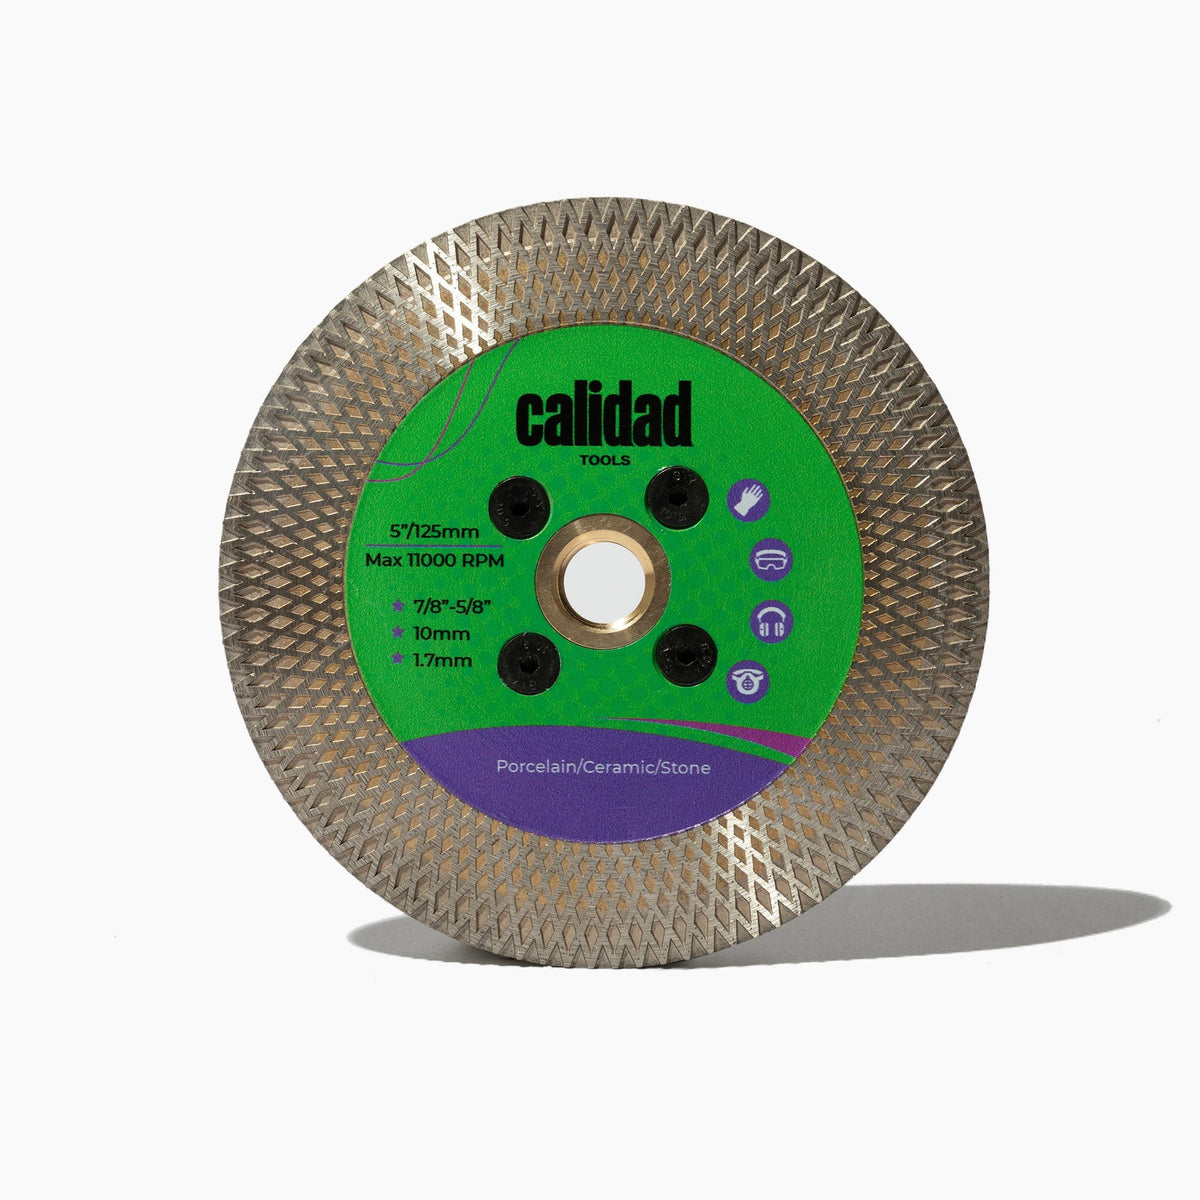 5&quot; Durty Kurt Blade for Tile &amp; Porcelain by Calidad Tools. A premium angle grinder cutting disc. 